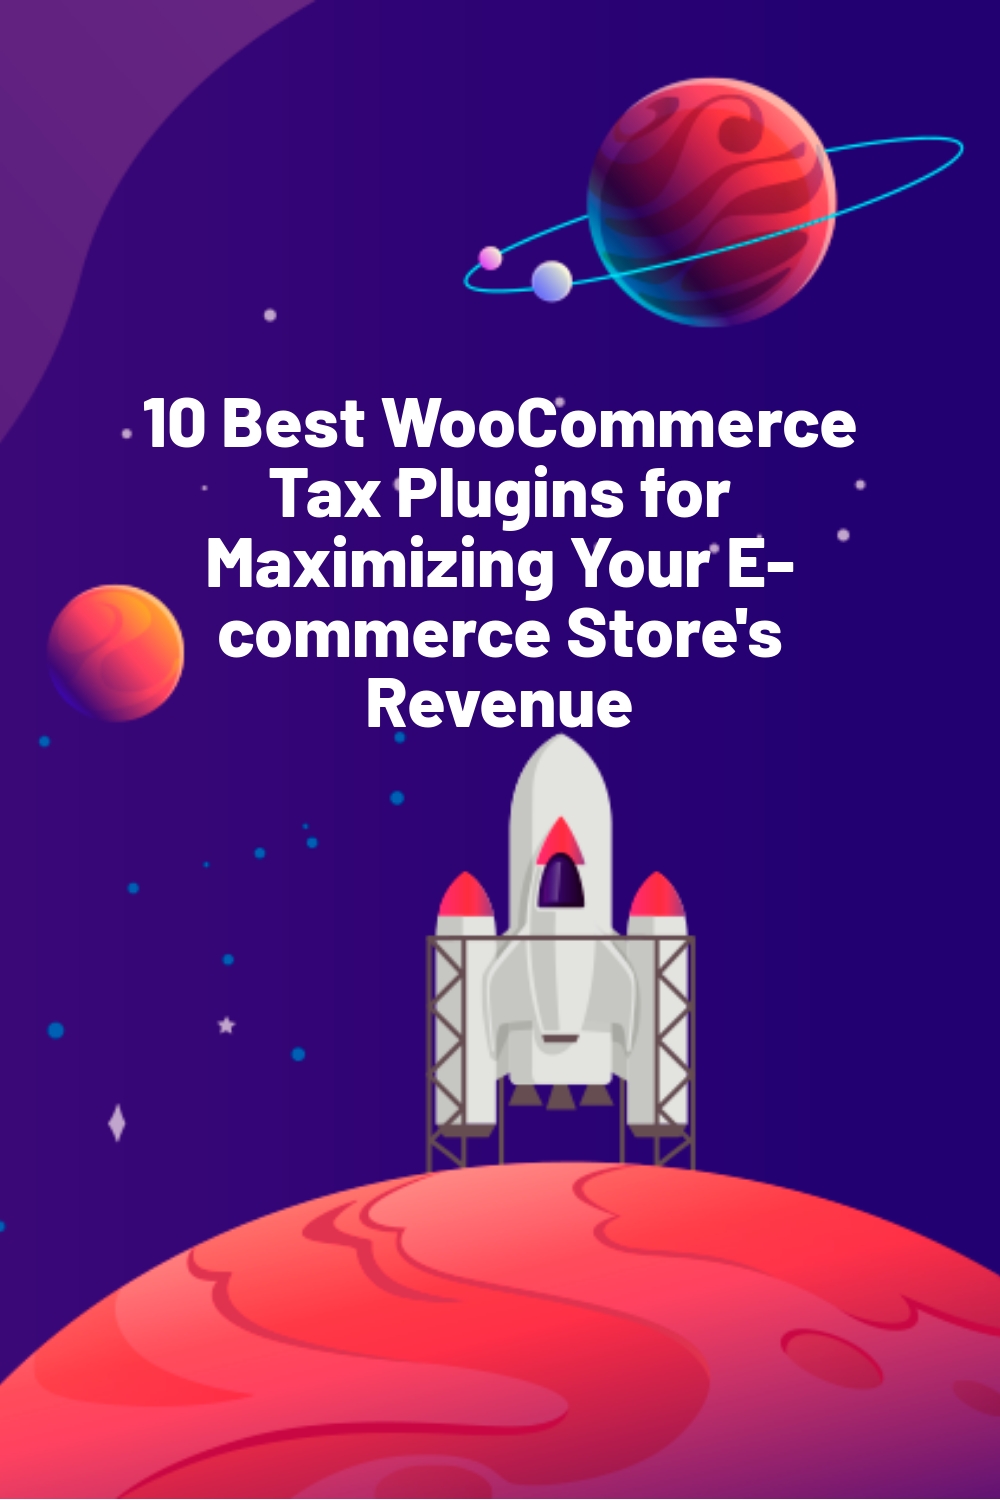 10 Best WooCommerce Tax Plugins for Maximizing Your E-commerce Store’s Revenue